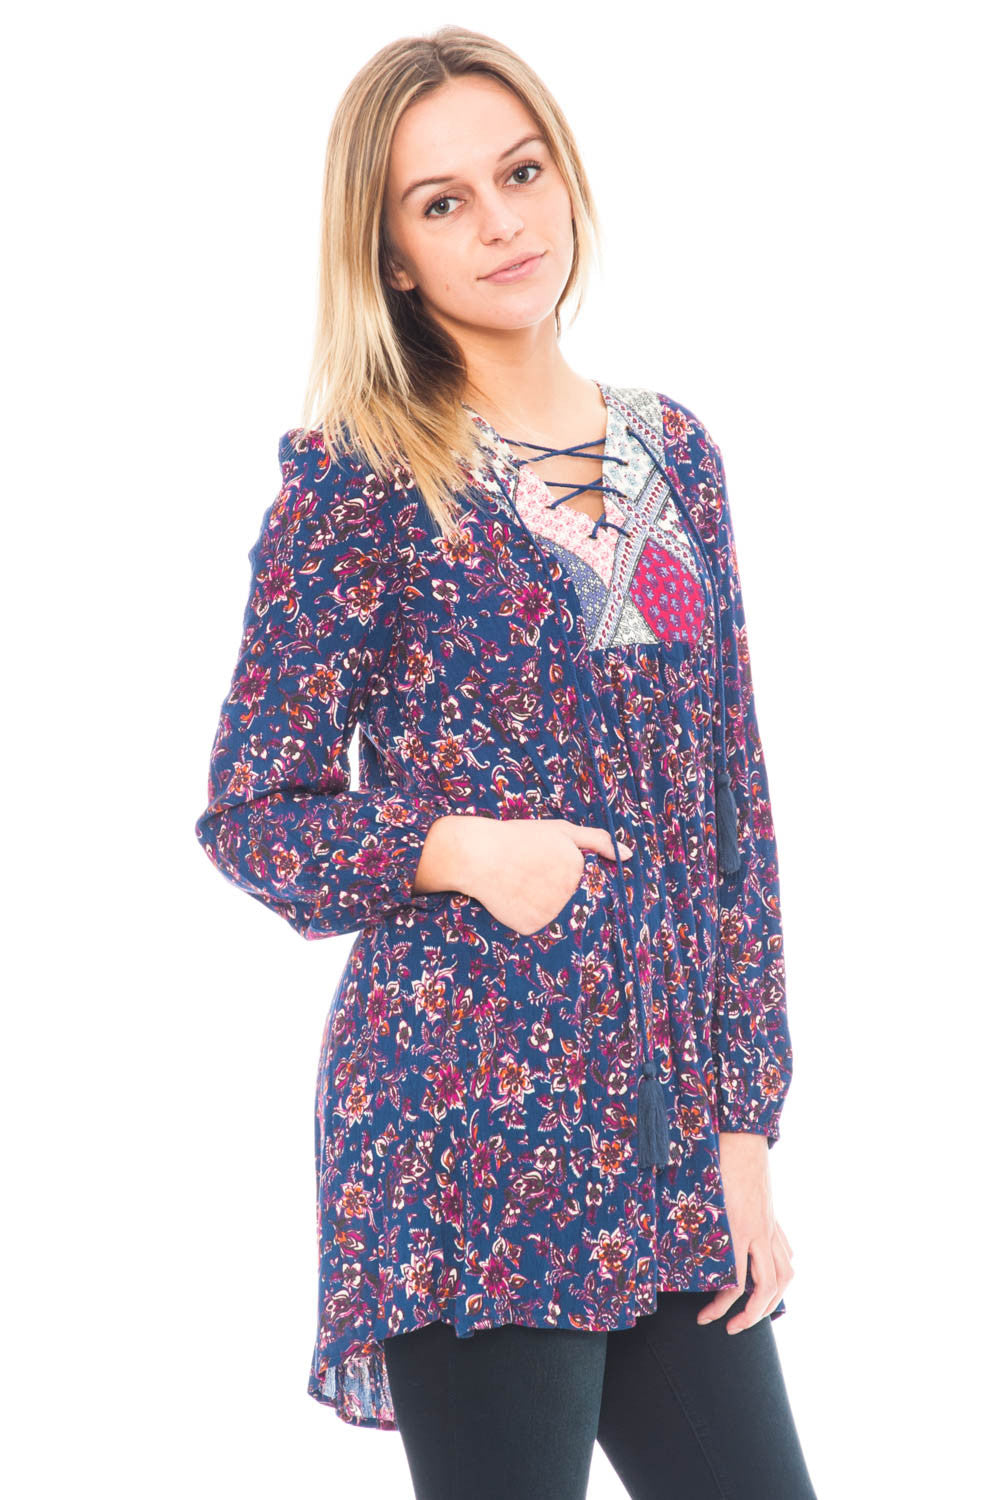 Tunic - Sheer Floral High Low Top with Pockets